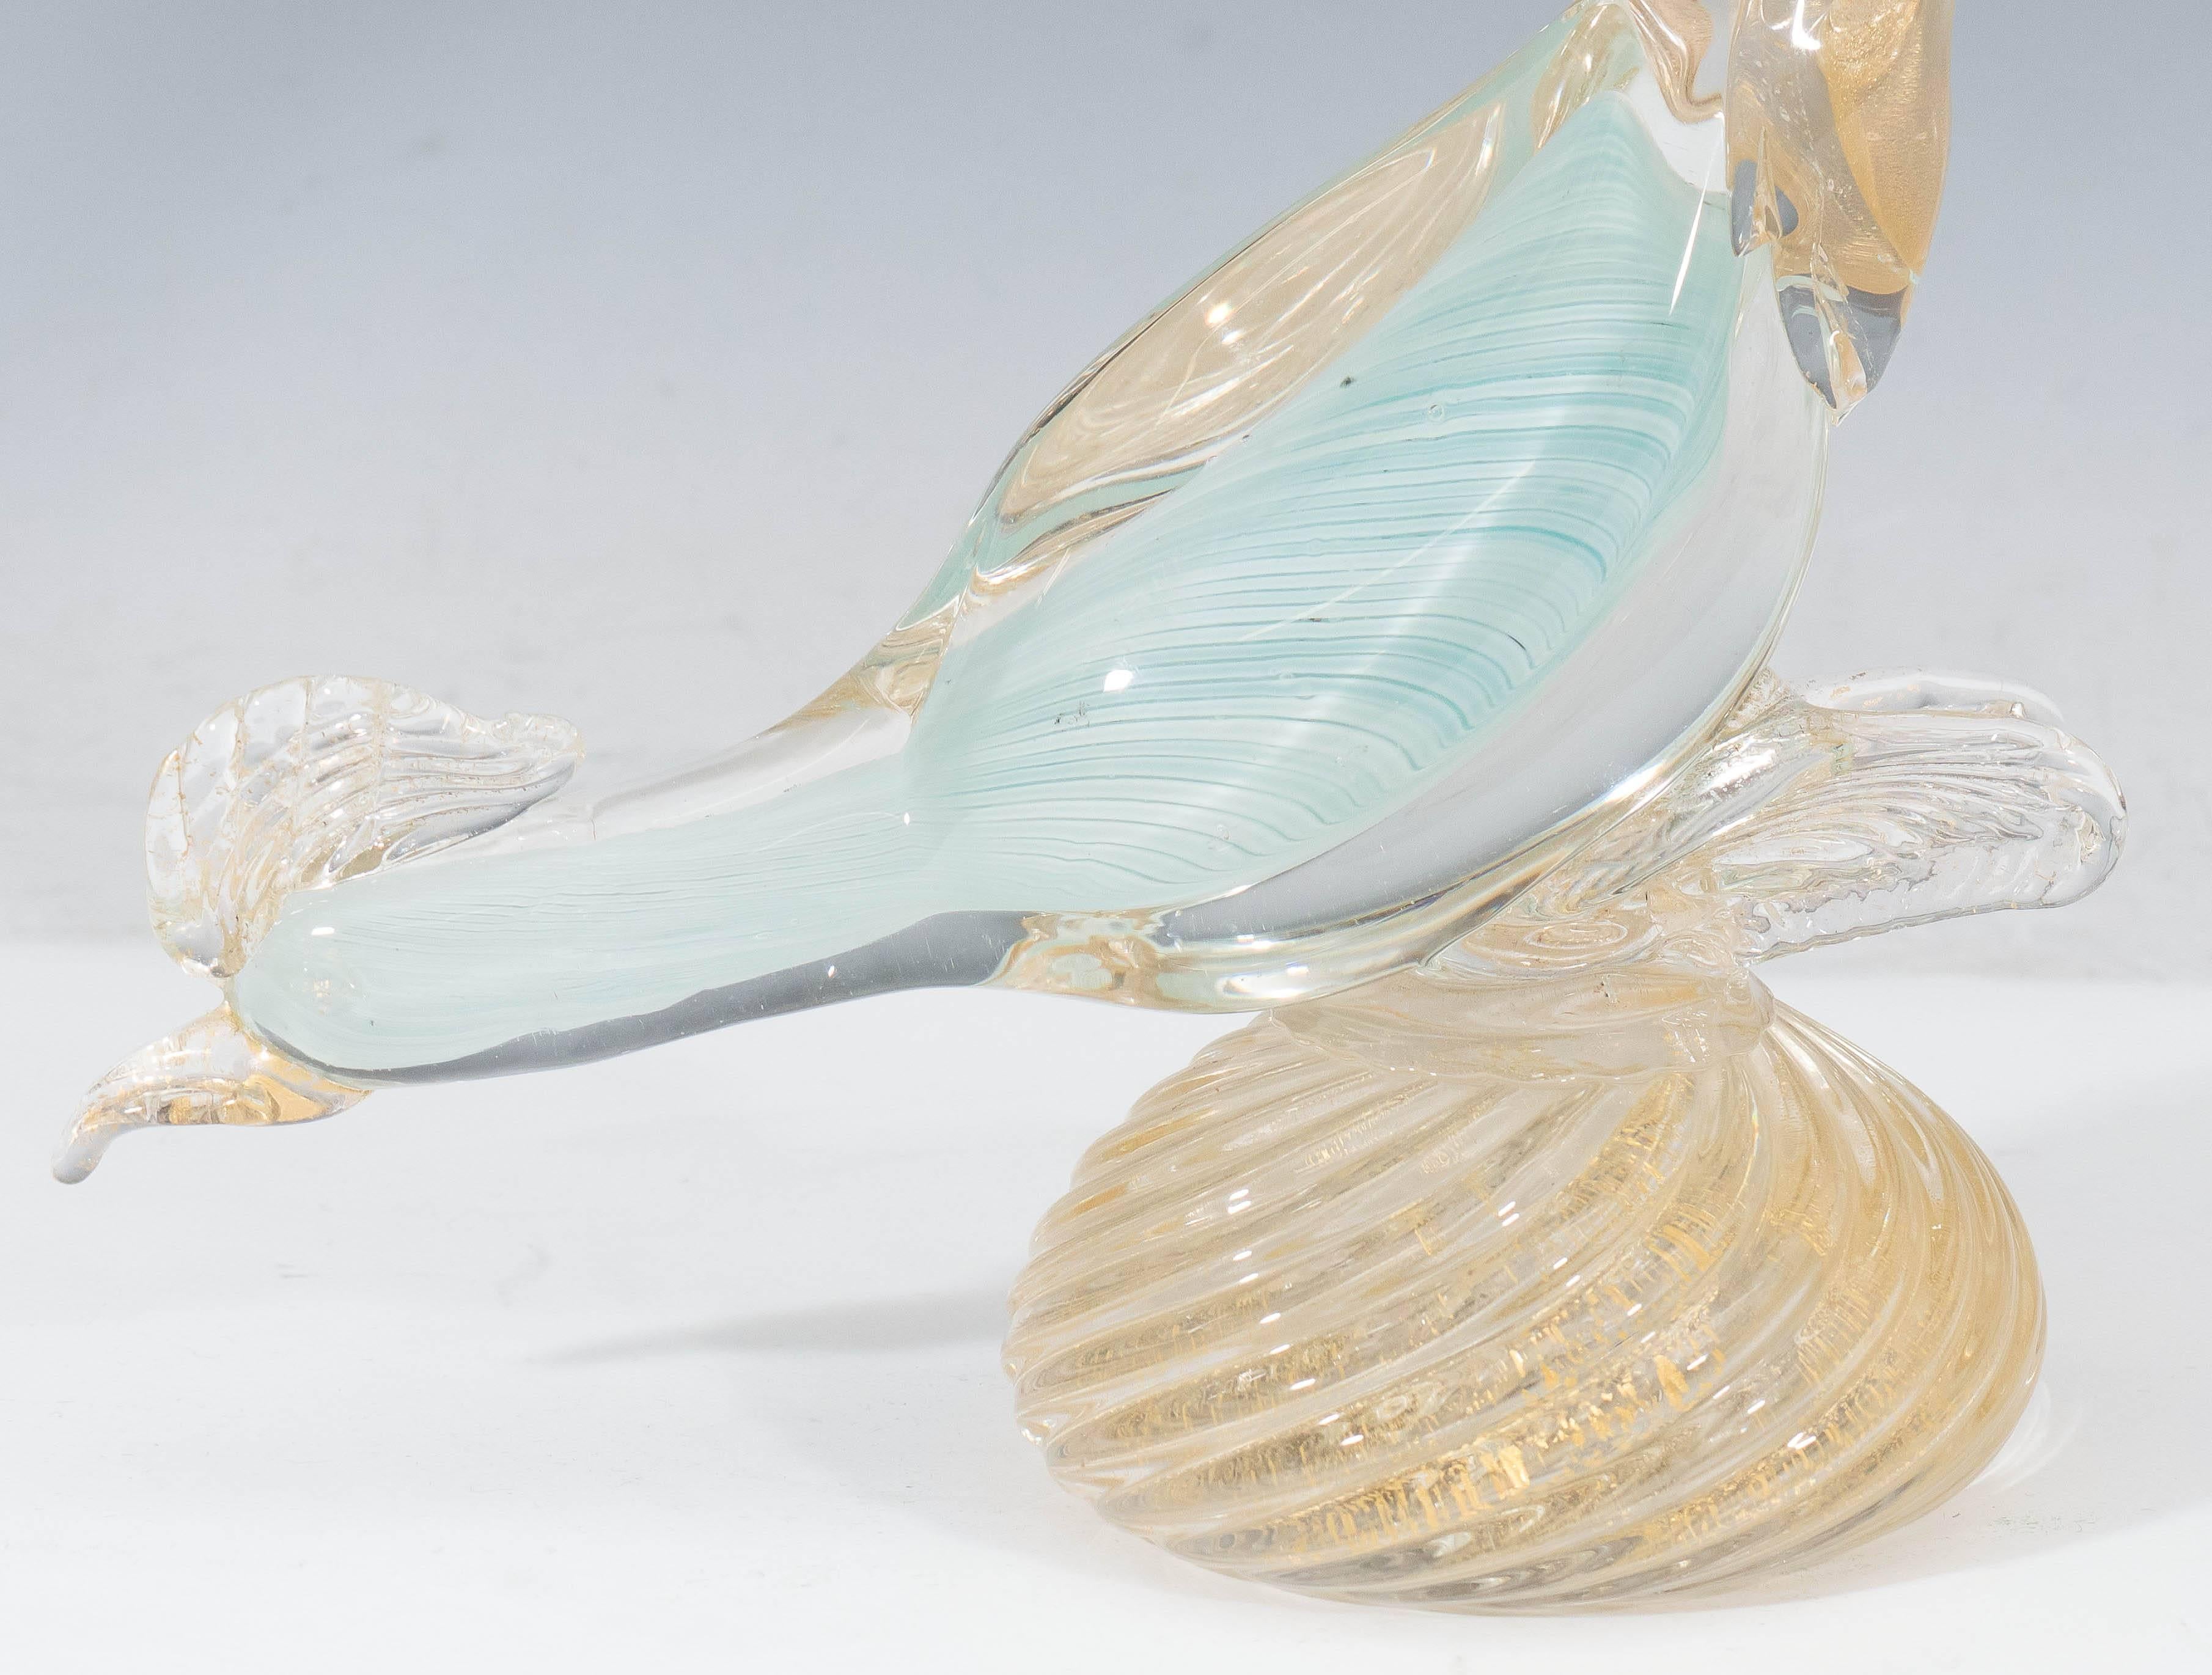 A Venetian sculptural pheasant in handblown glass, produced on the isle of Murano, circa 1950s. The bird comes in pale blue, crest, beak, feathers and gadrooned base decorated with flecks of gold leaf. Markings include original sticker, indicative